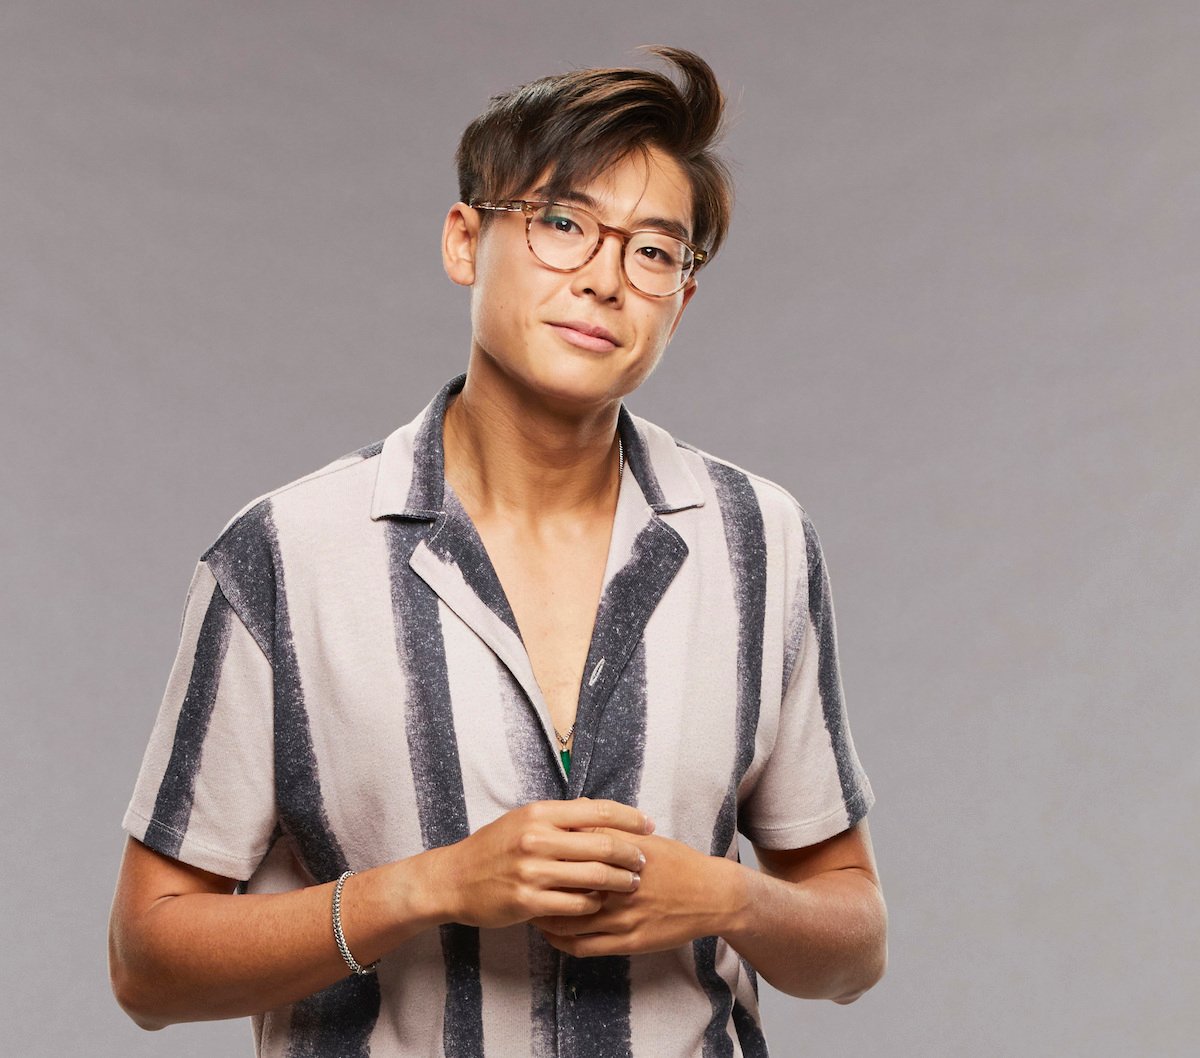 Derek Xiao of 'Big Brother 23' poses in a stripped shirt